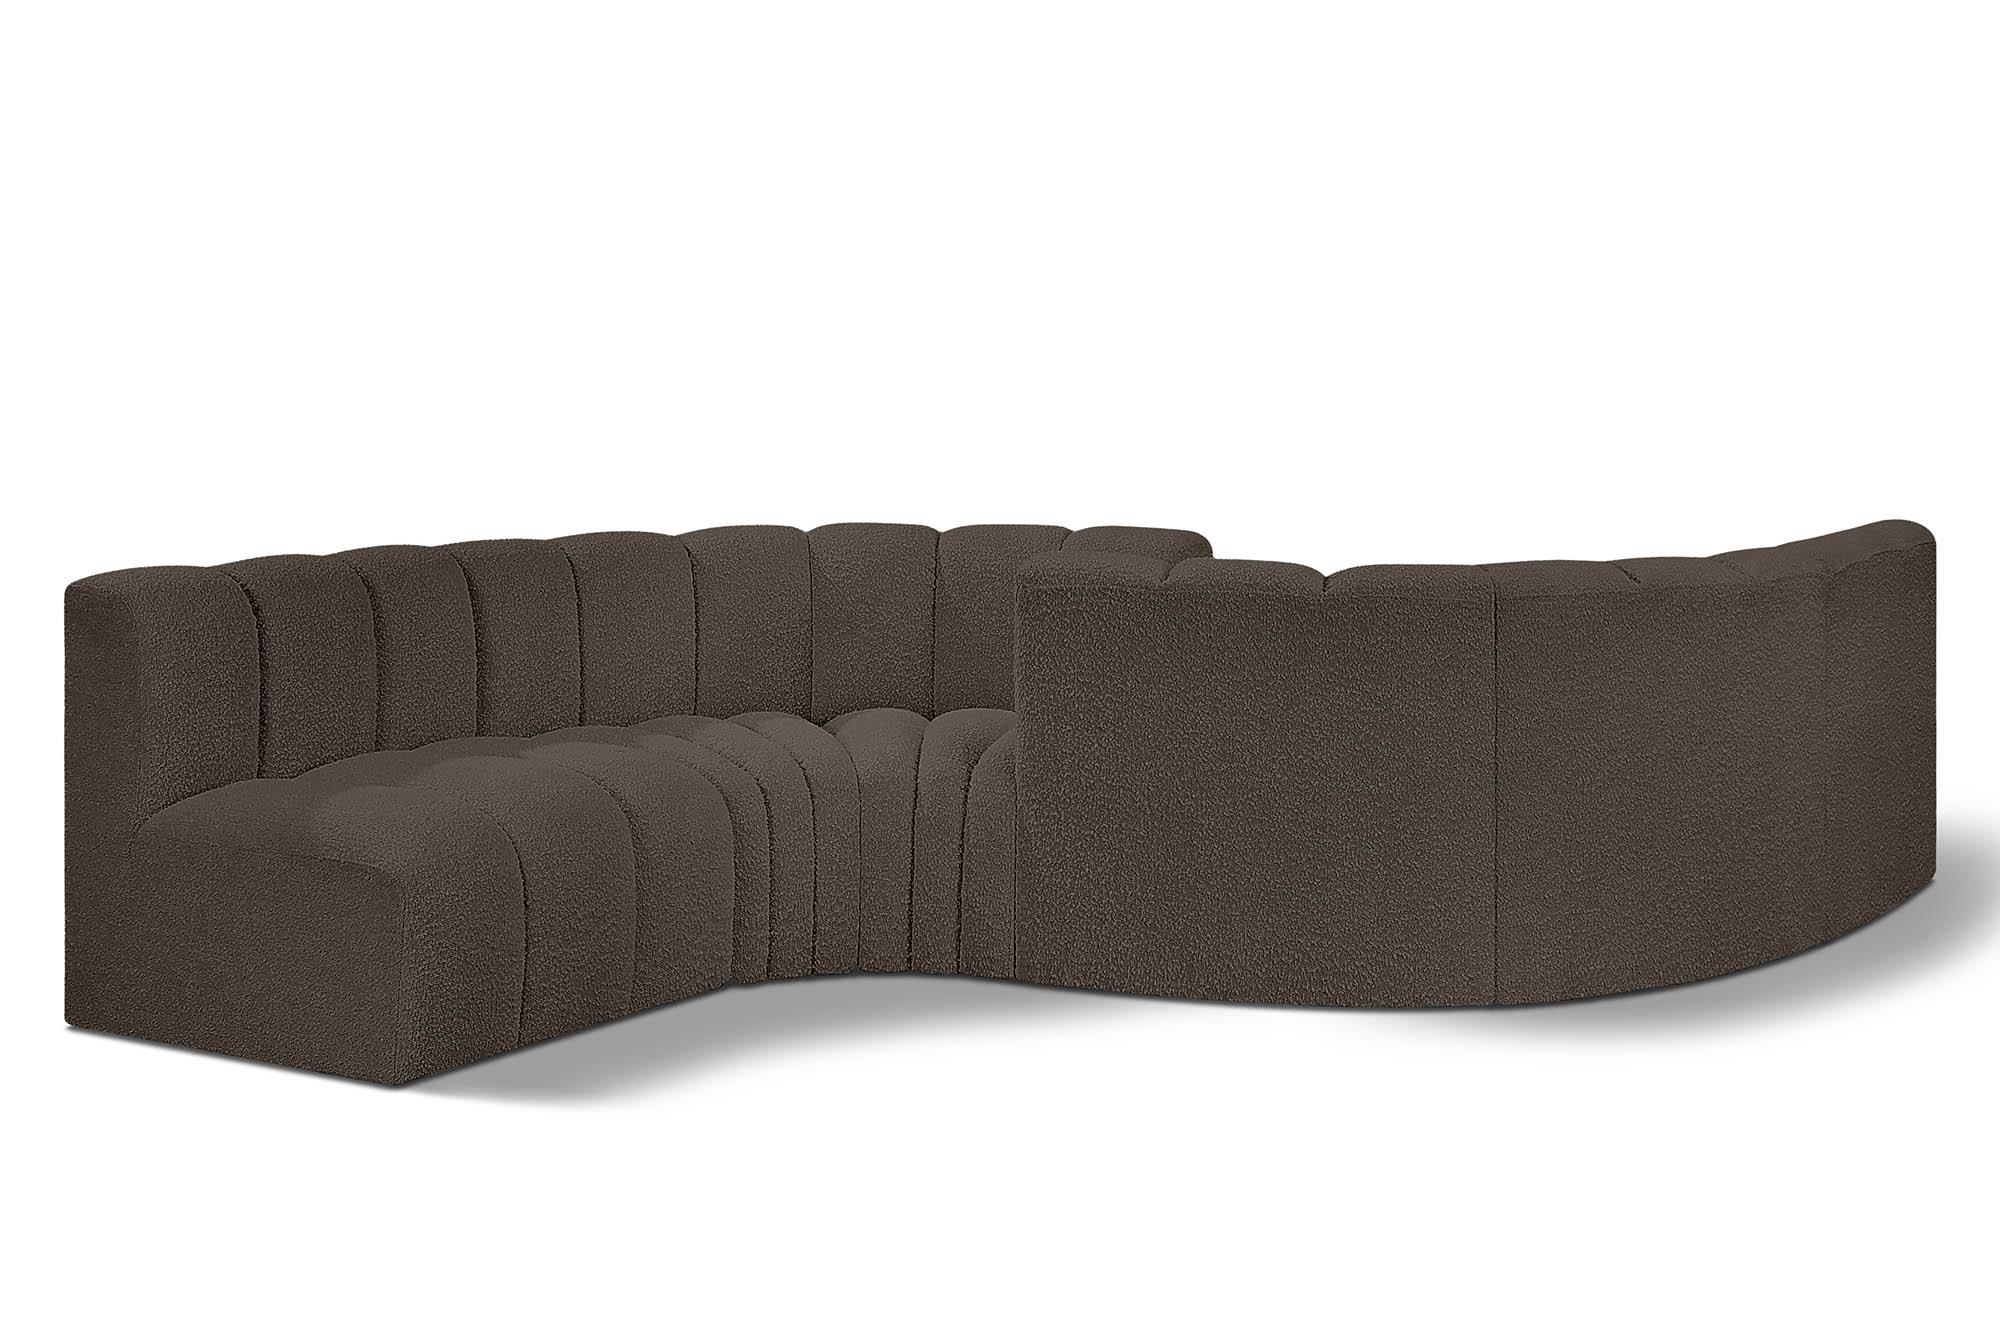 Contemporary, Modern Modular Sectional Sofa ARC 102Brown-S6D 102Brown-S6D in Brown 